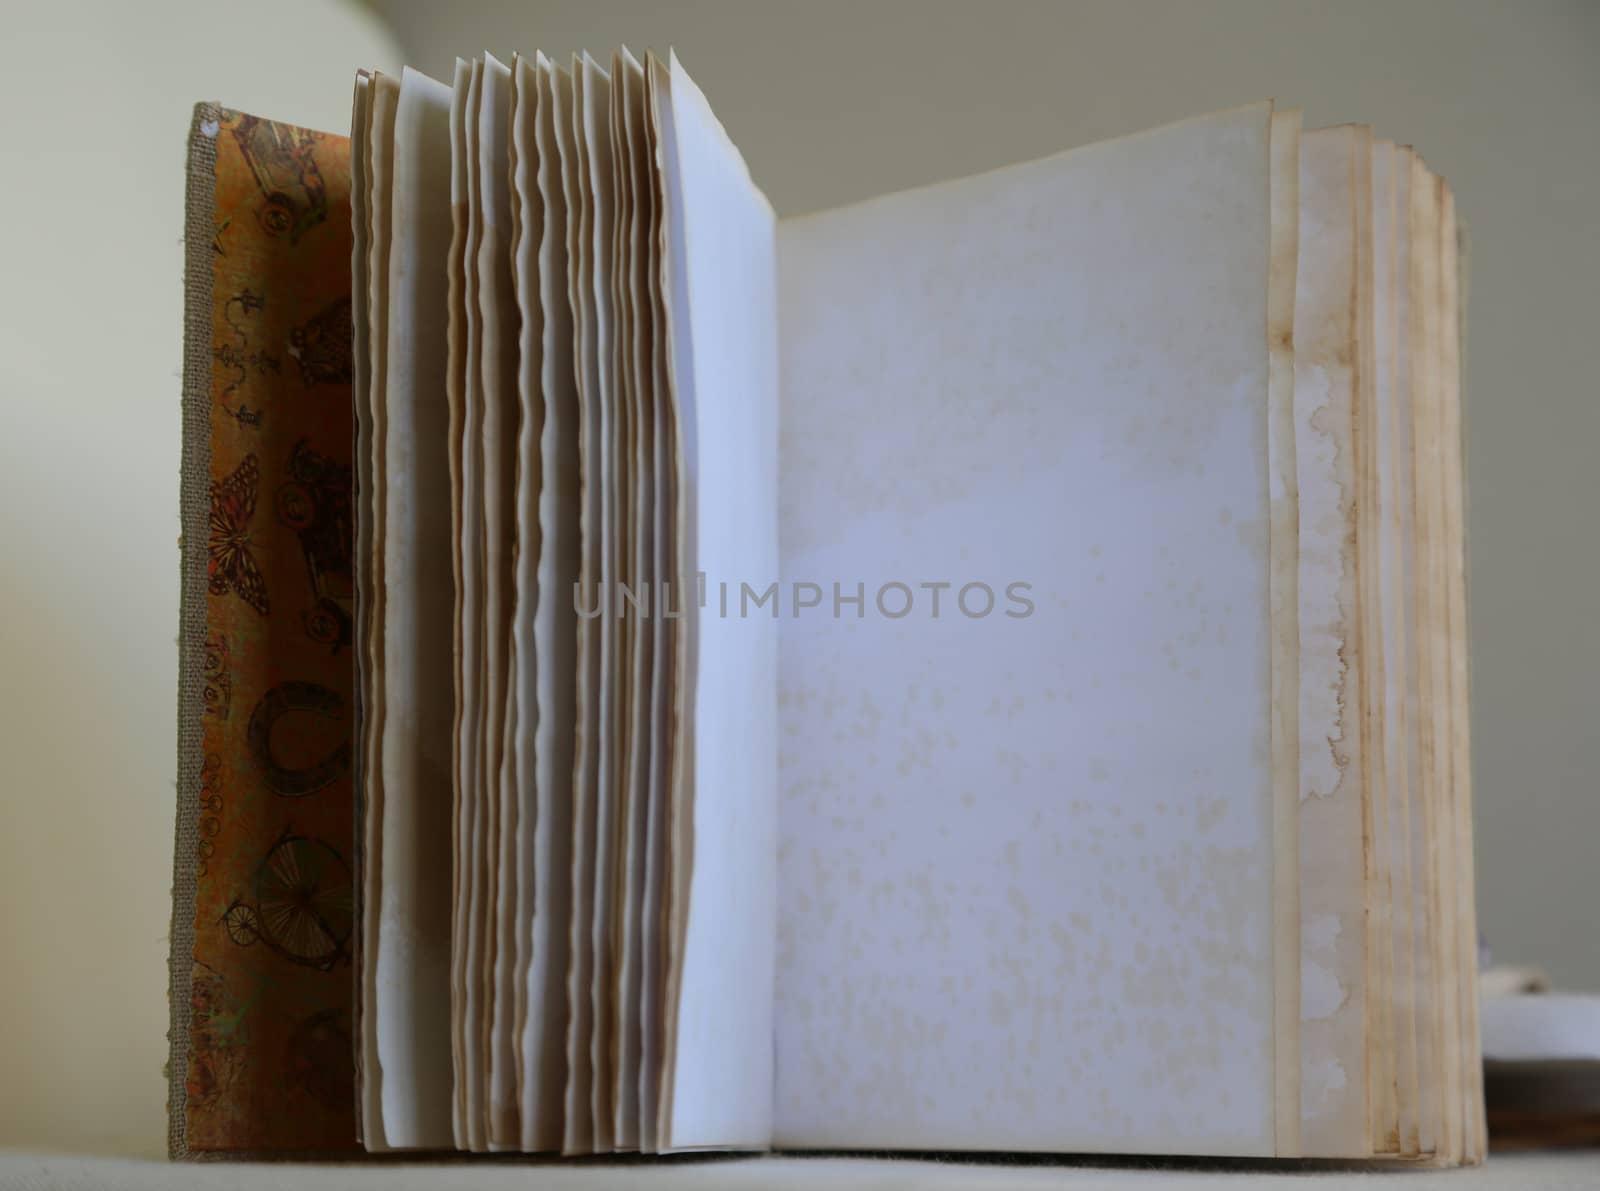 opened handmade agenda with distressed pages